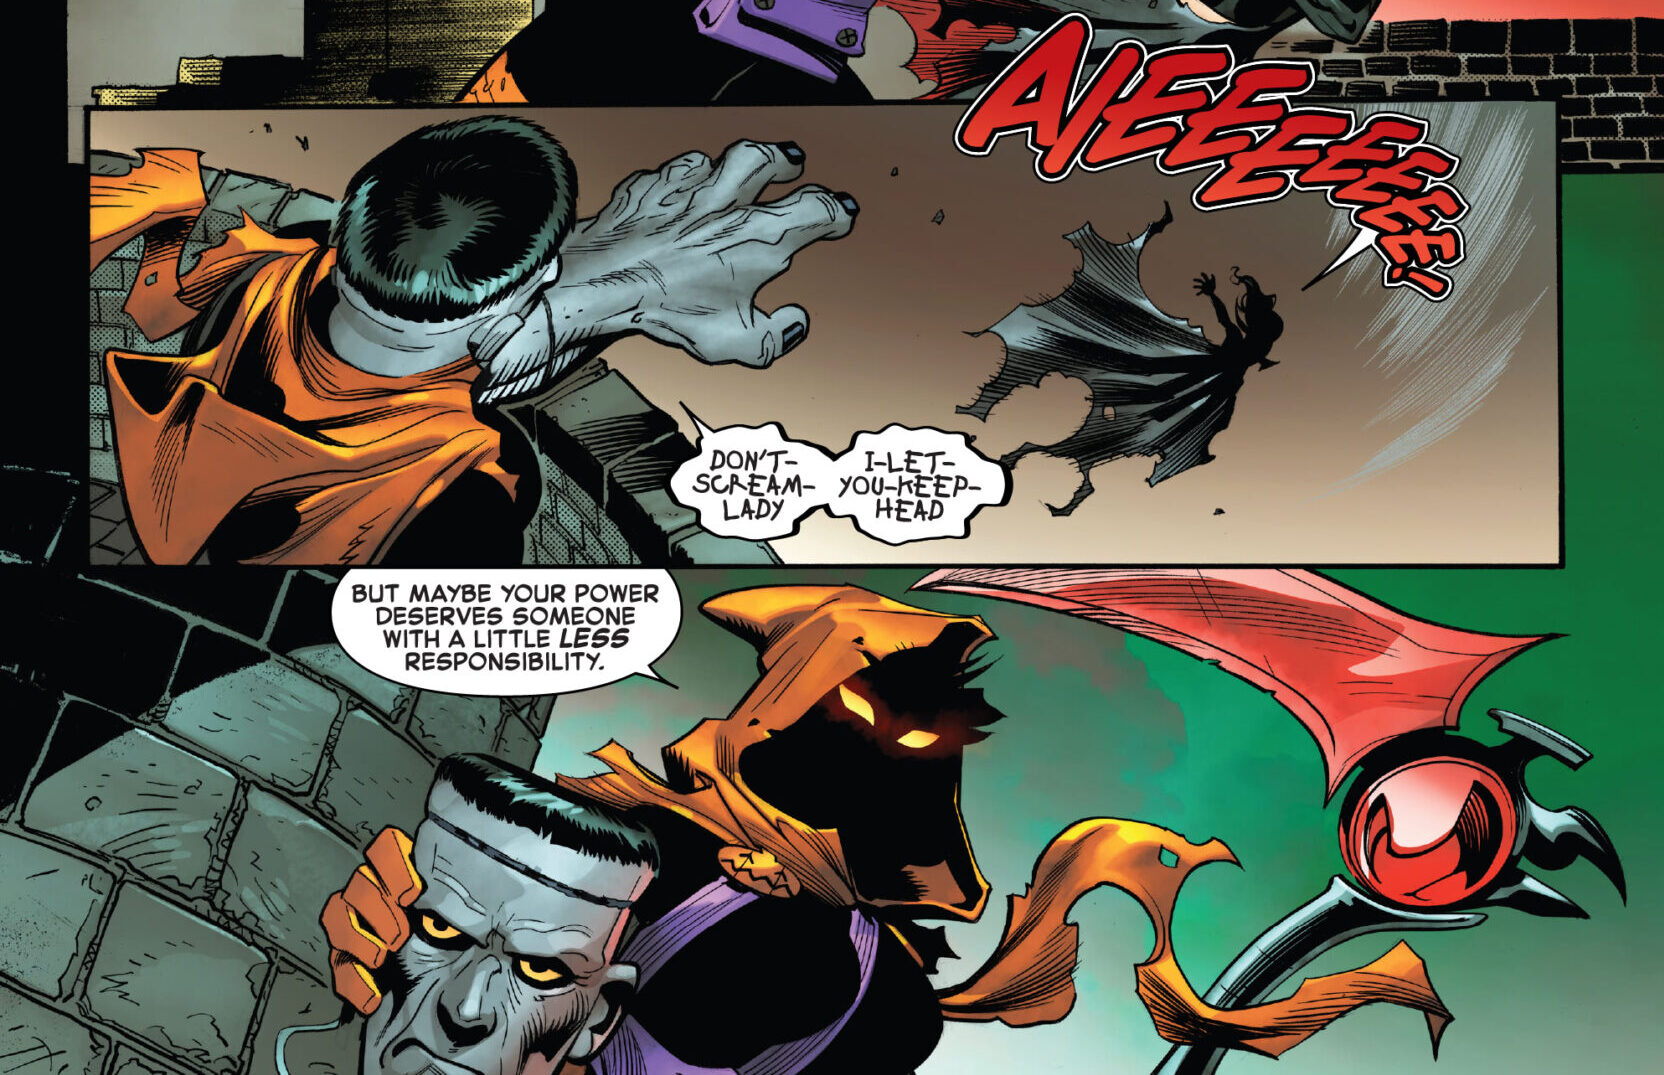 Amazing Spider-Man #18 spoilers 4 Goblin Queen Chasm Hallows' Eve